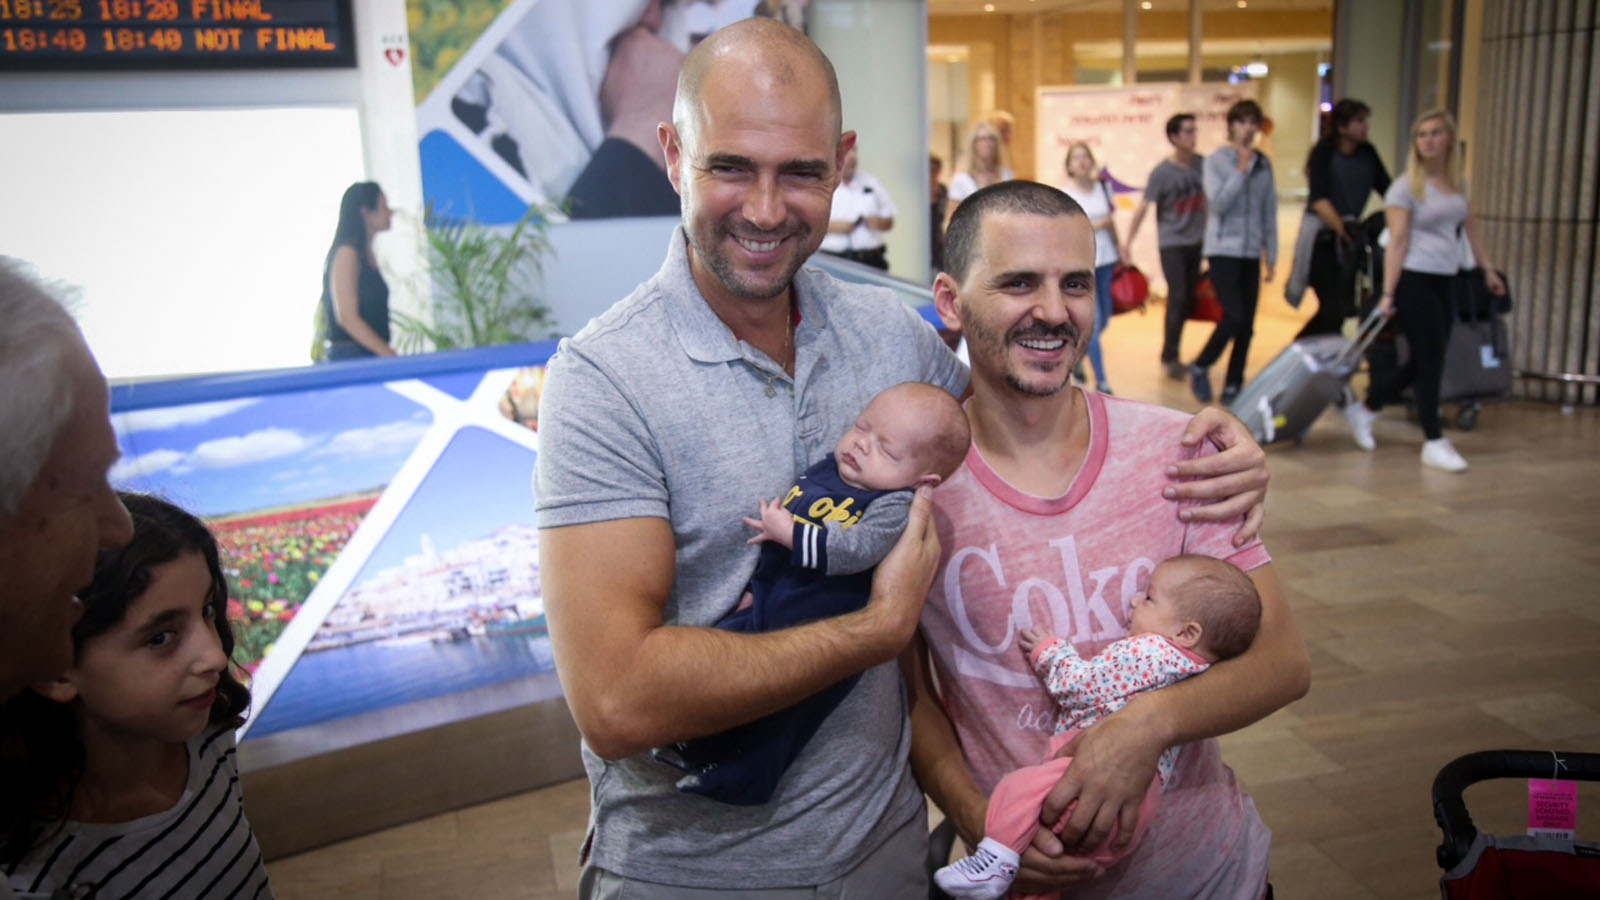 Likud MK Amir Ohana and his partner, Alon Hadad, seen at Ben-Gurion International Airport as they arrive back from the US with their children.  Photo by FLASH90